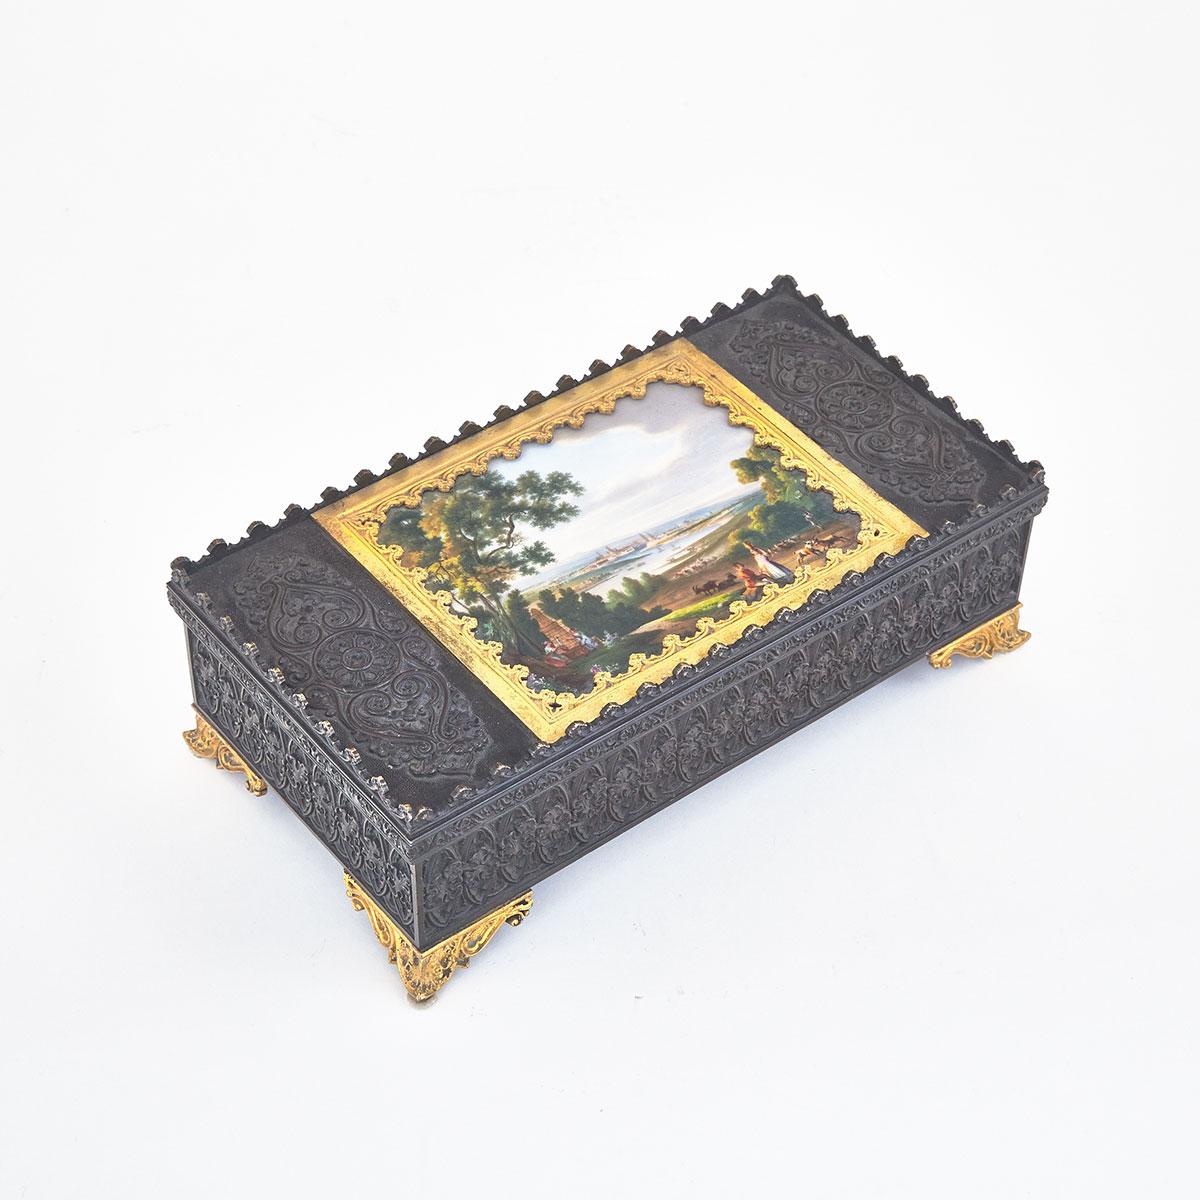 French Gothic Revival Porcelain Mounted Gilt and Patinated Bronze Desk Box, c.1840